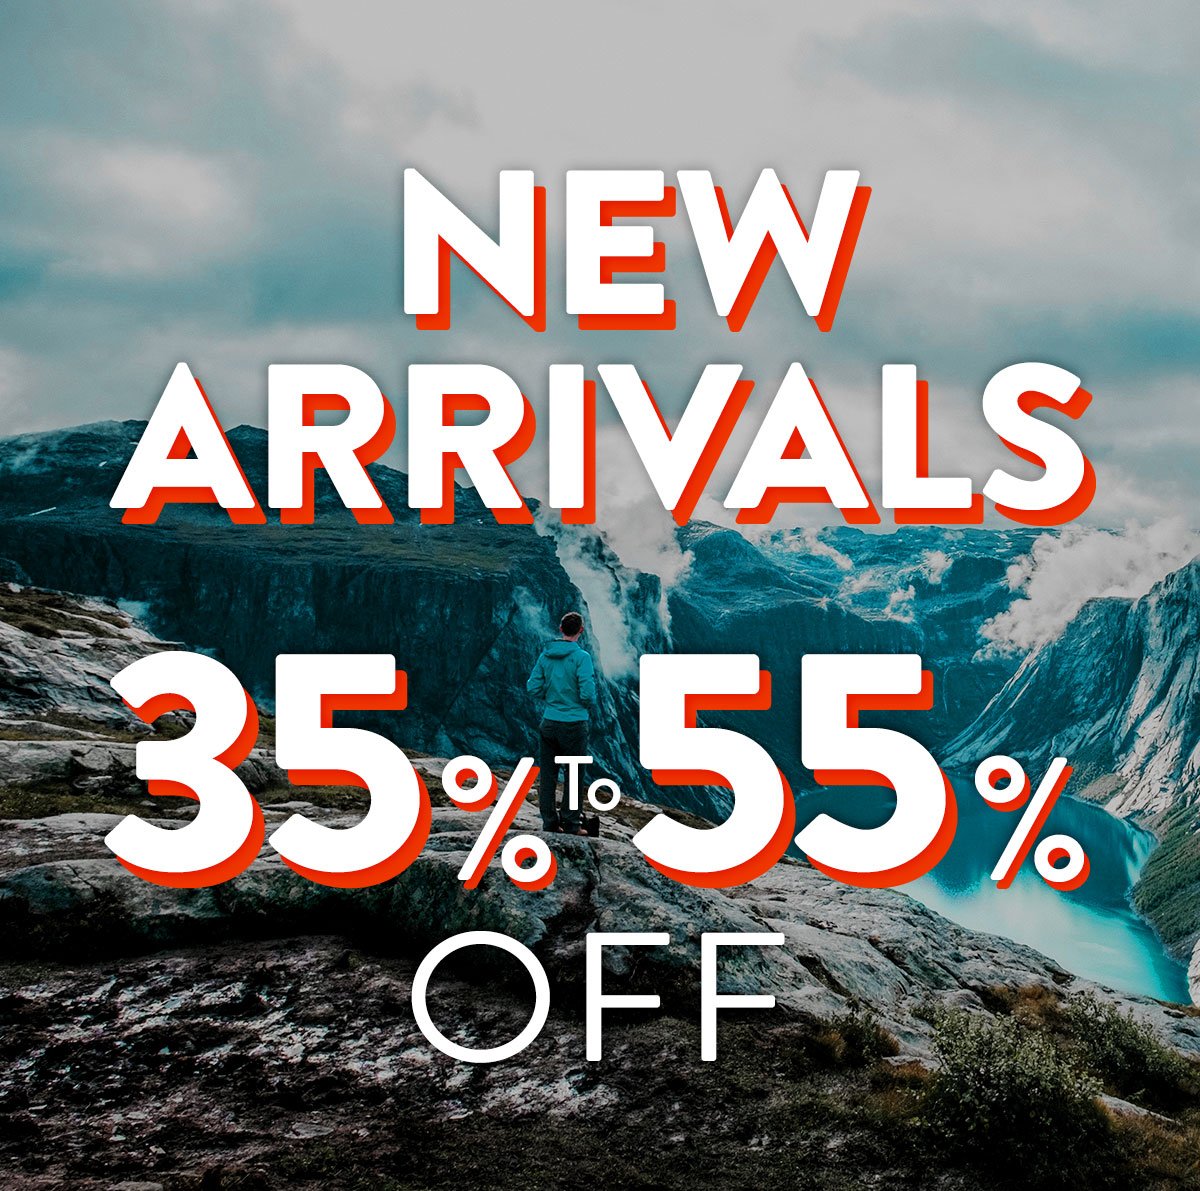 New arrivals 35% to 55% off